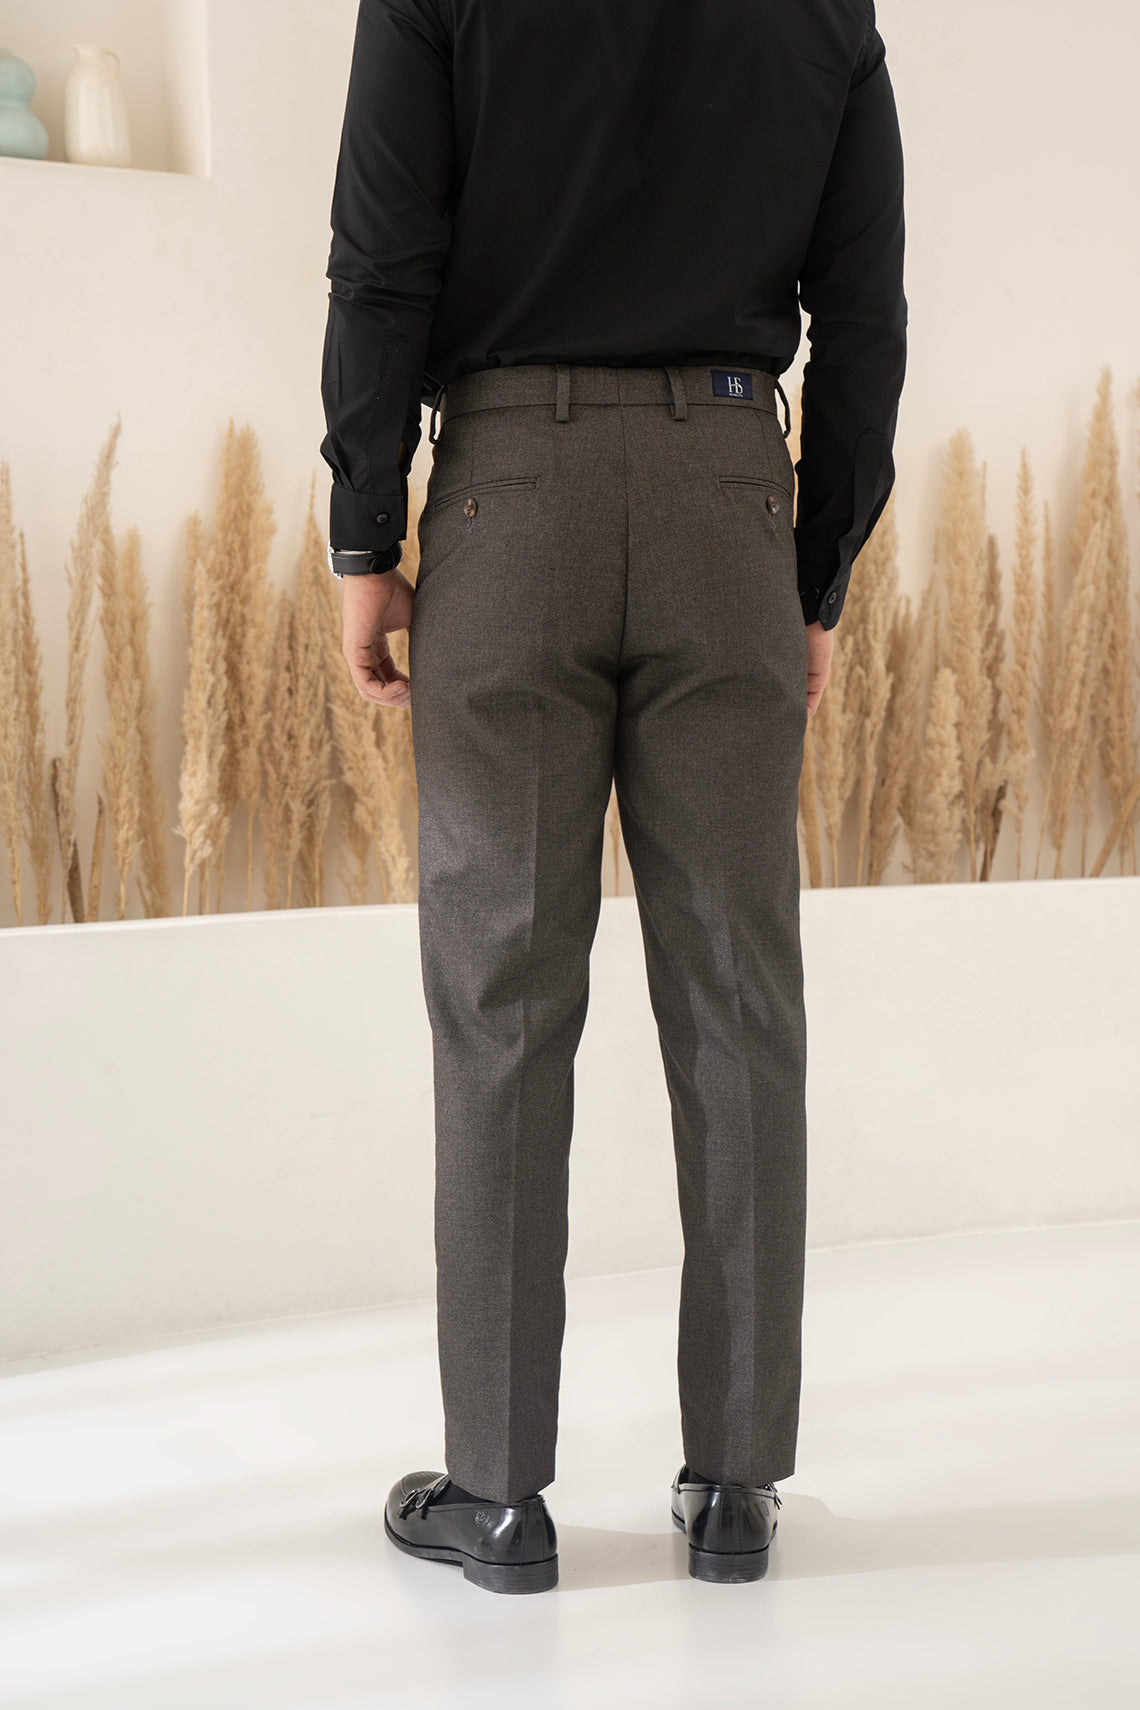 Father Sons Slim Formal Black Stretch Trousers With Silver Waist Adjus